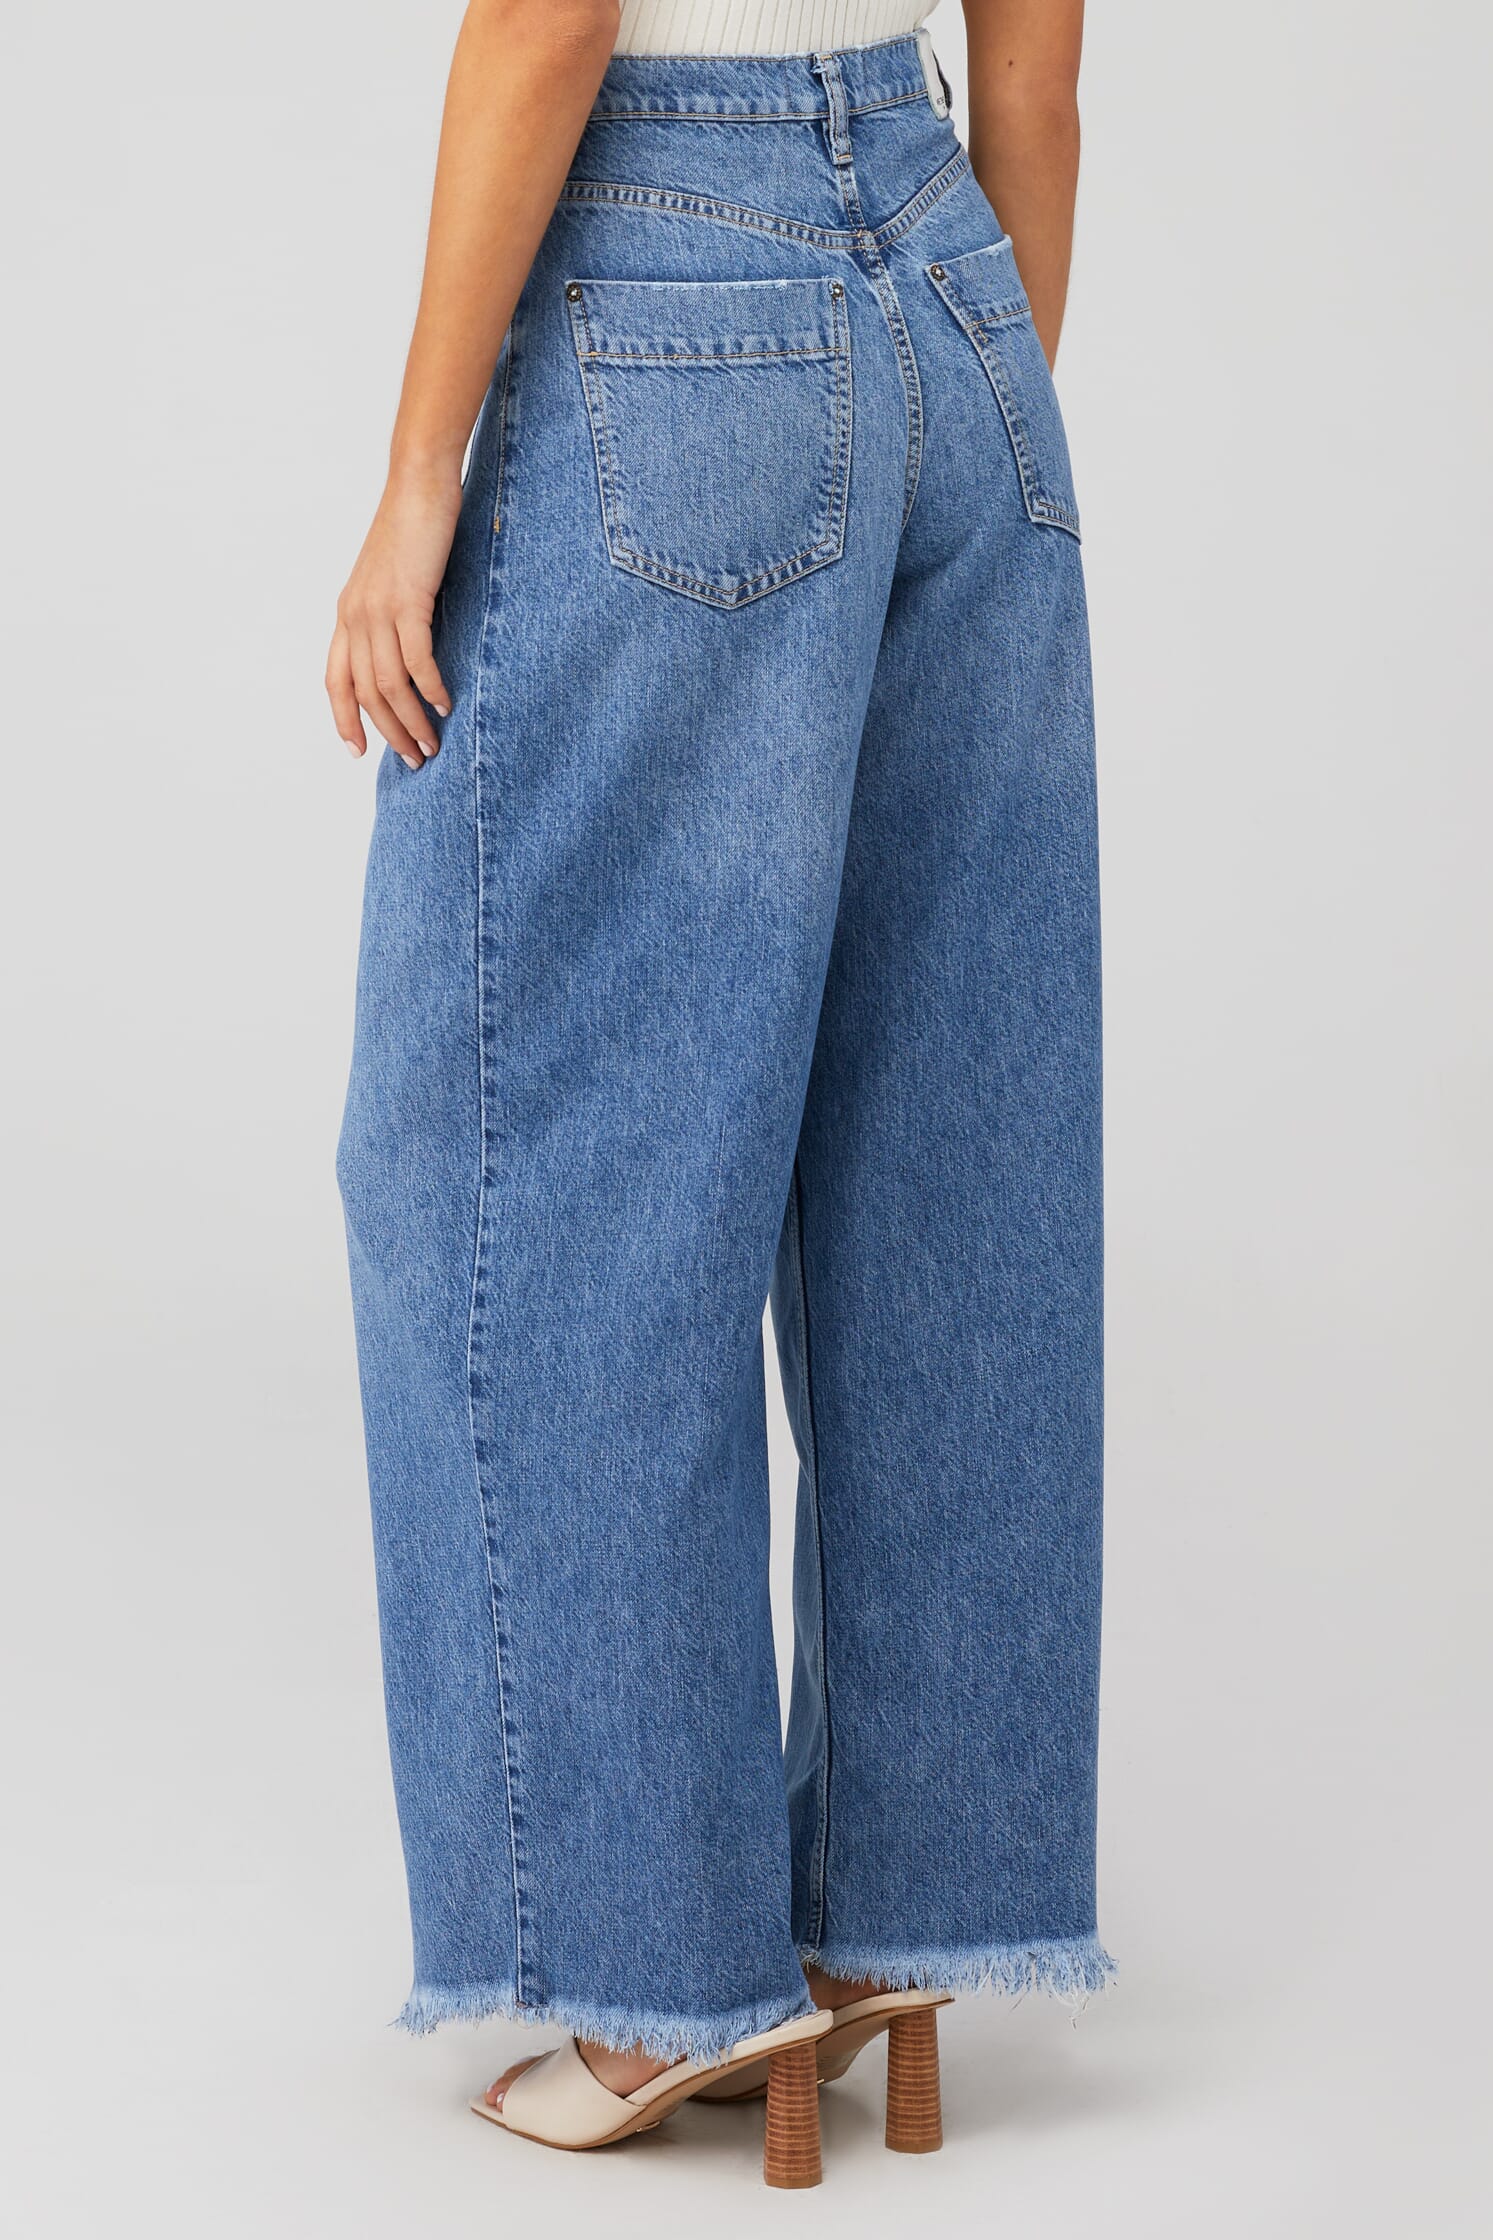 Free People | Old West Slouchy Jean in Canyon Blue| FashionPass